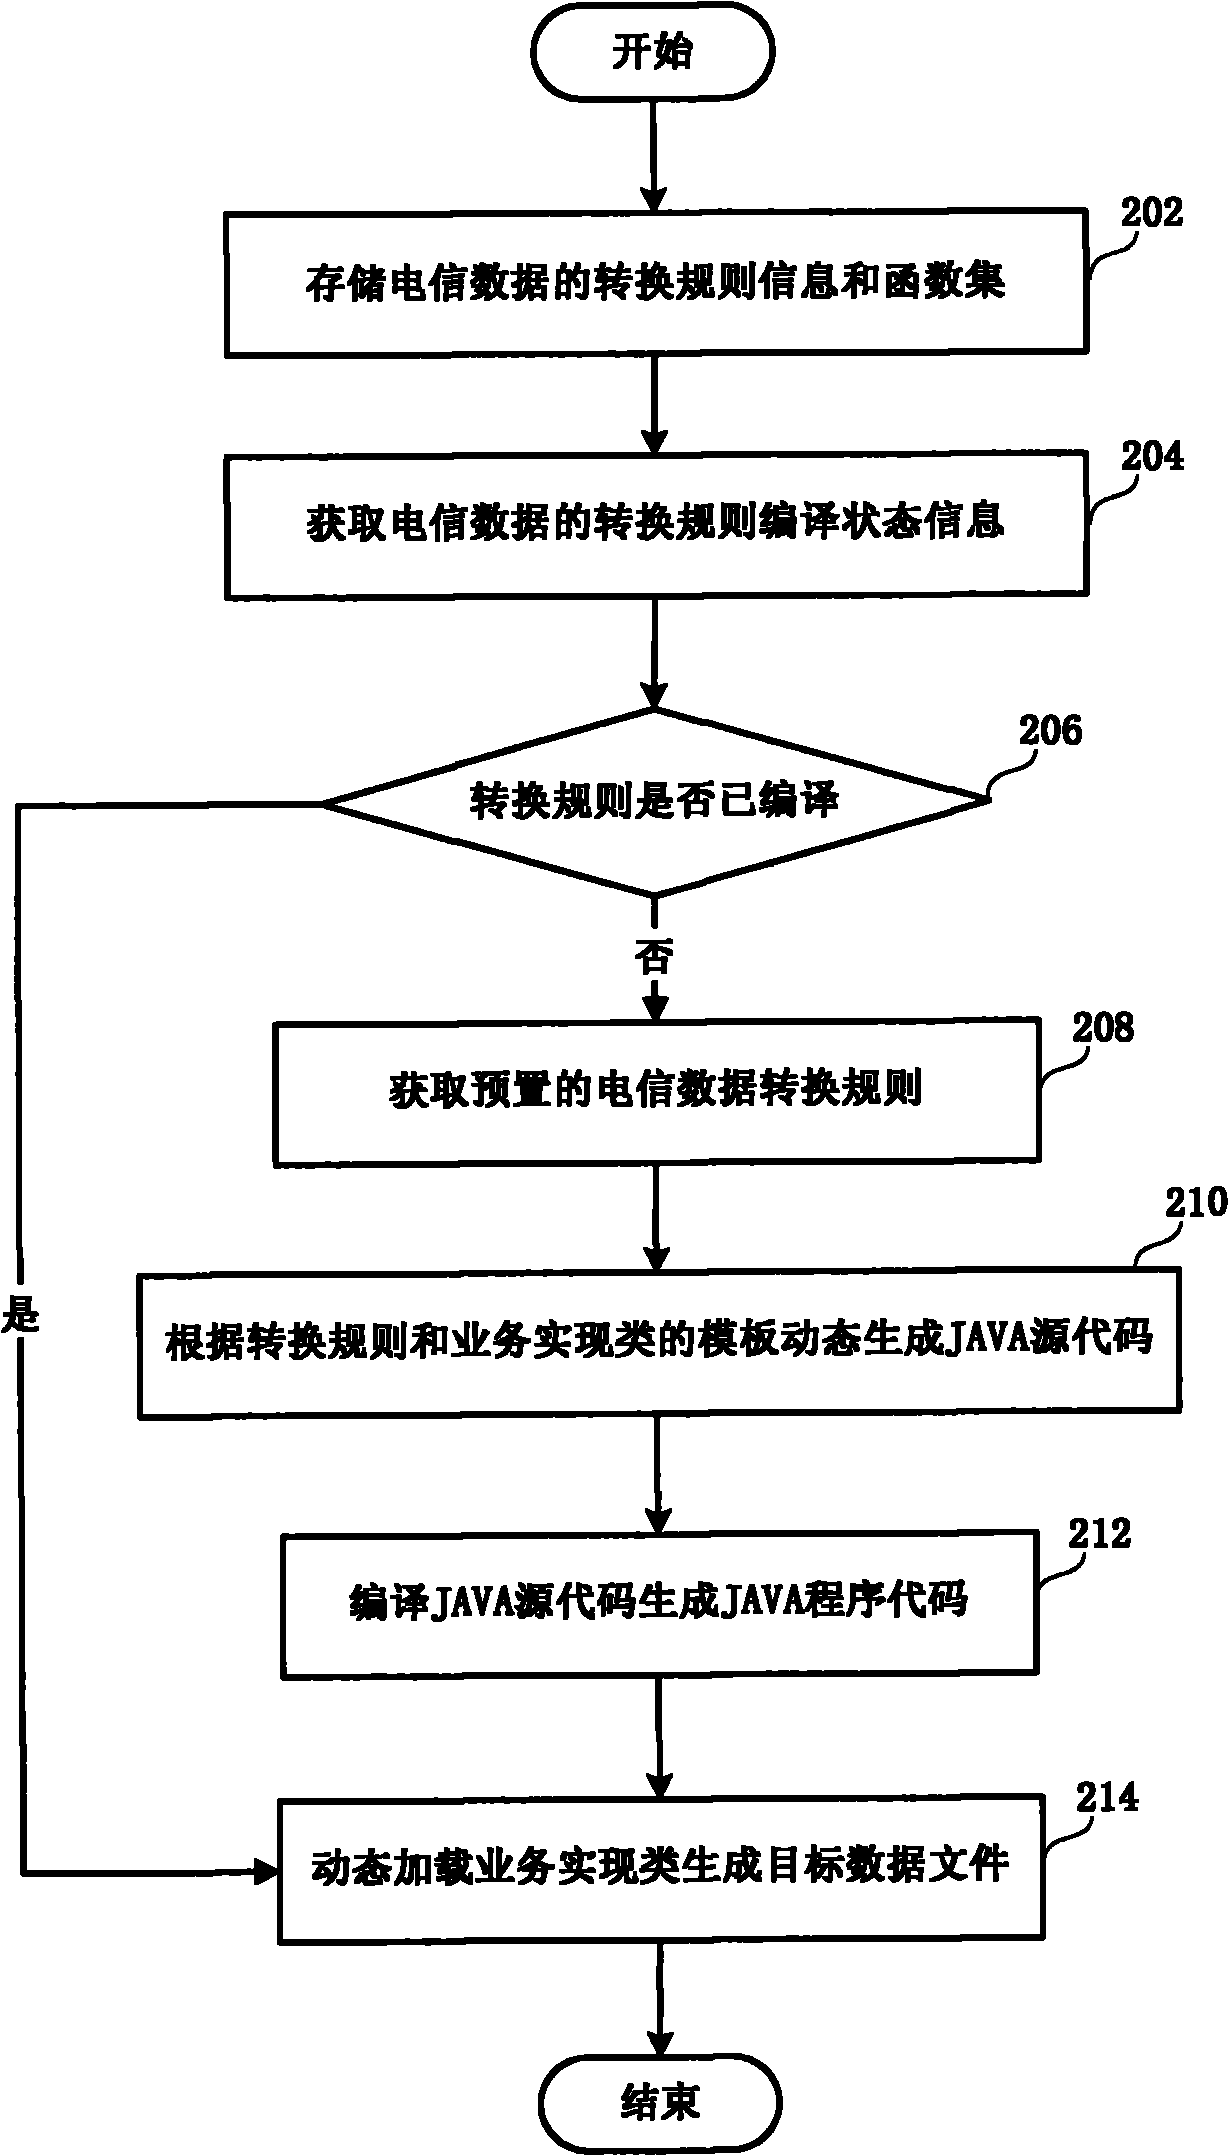 Method and system for dynamically converting telecommunications service data